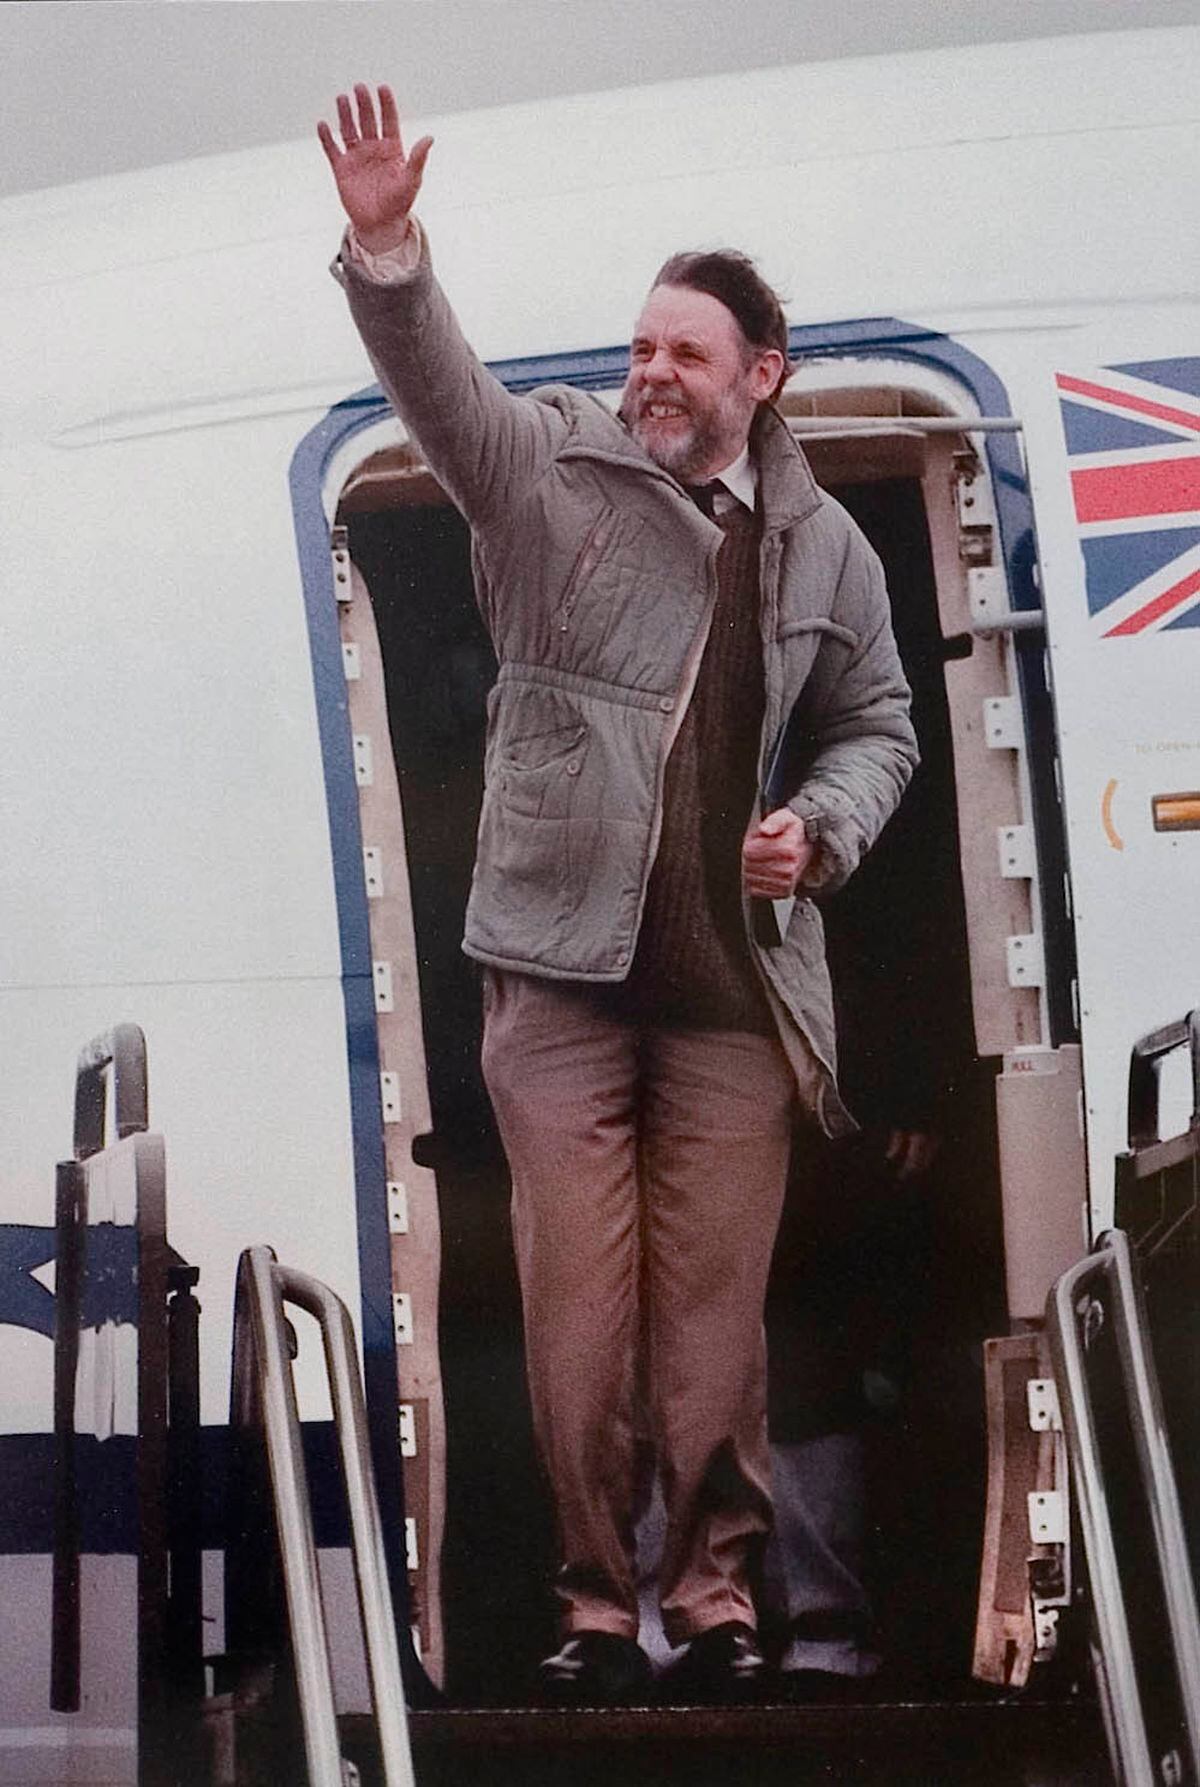 The hostage comes home - Terry Waite on his release in November 1991